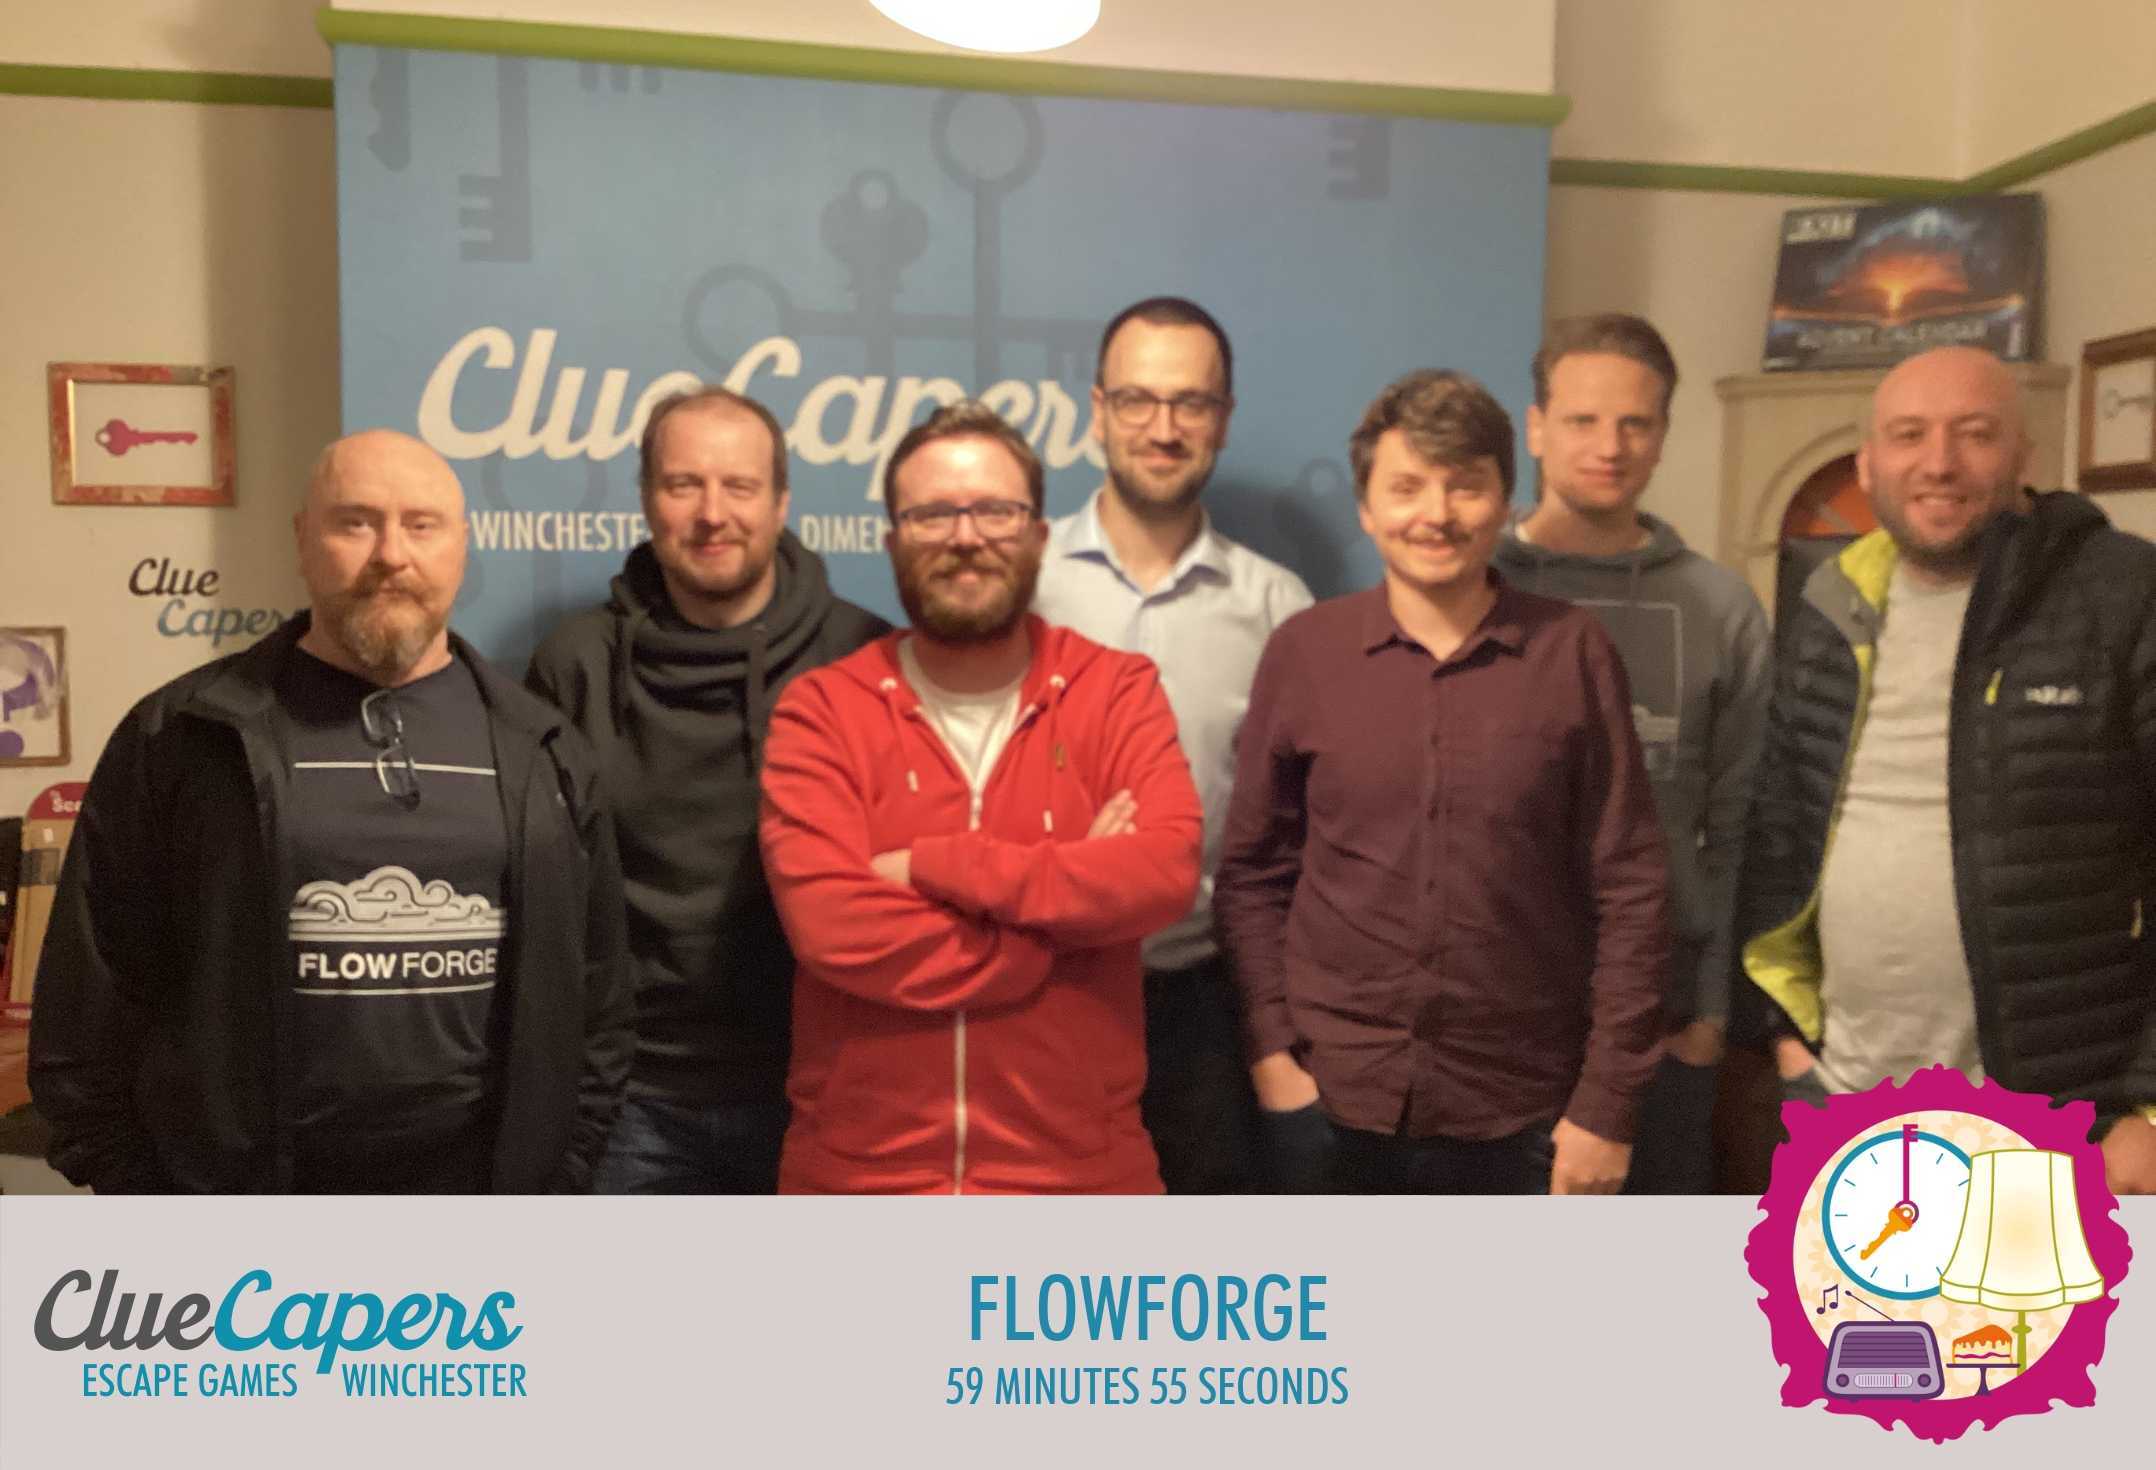 The FlowForge team pictured during our visit to Clue Capers